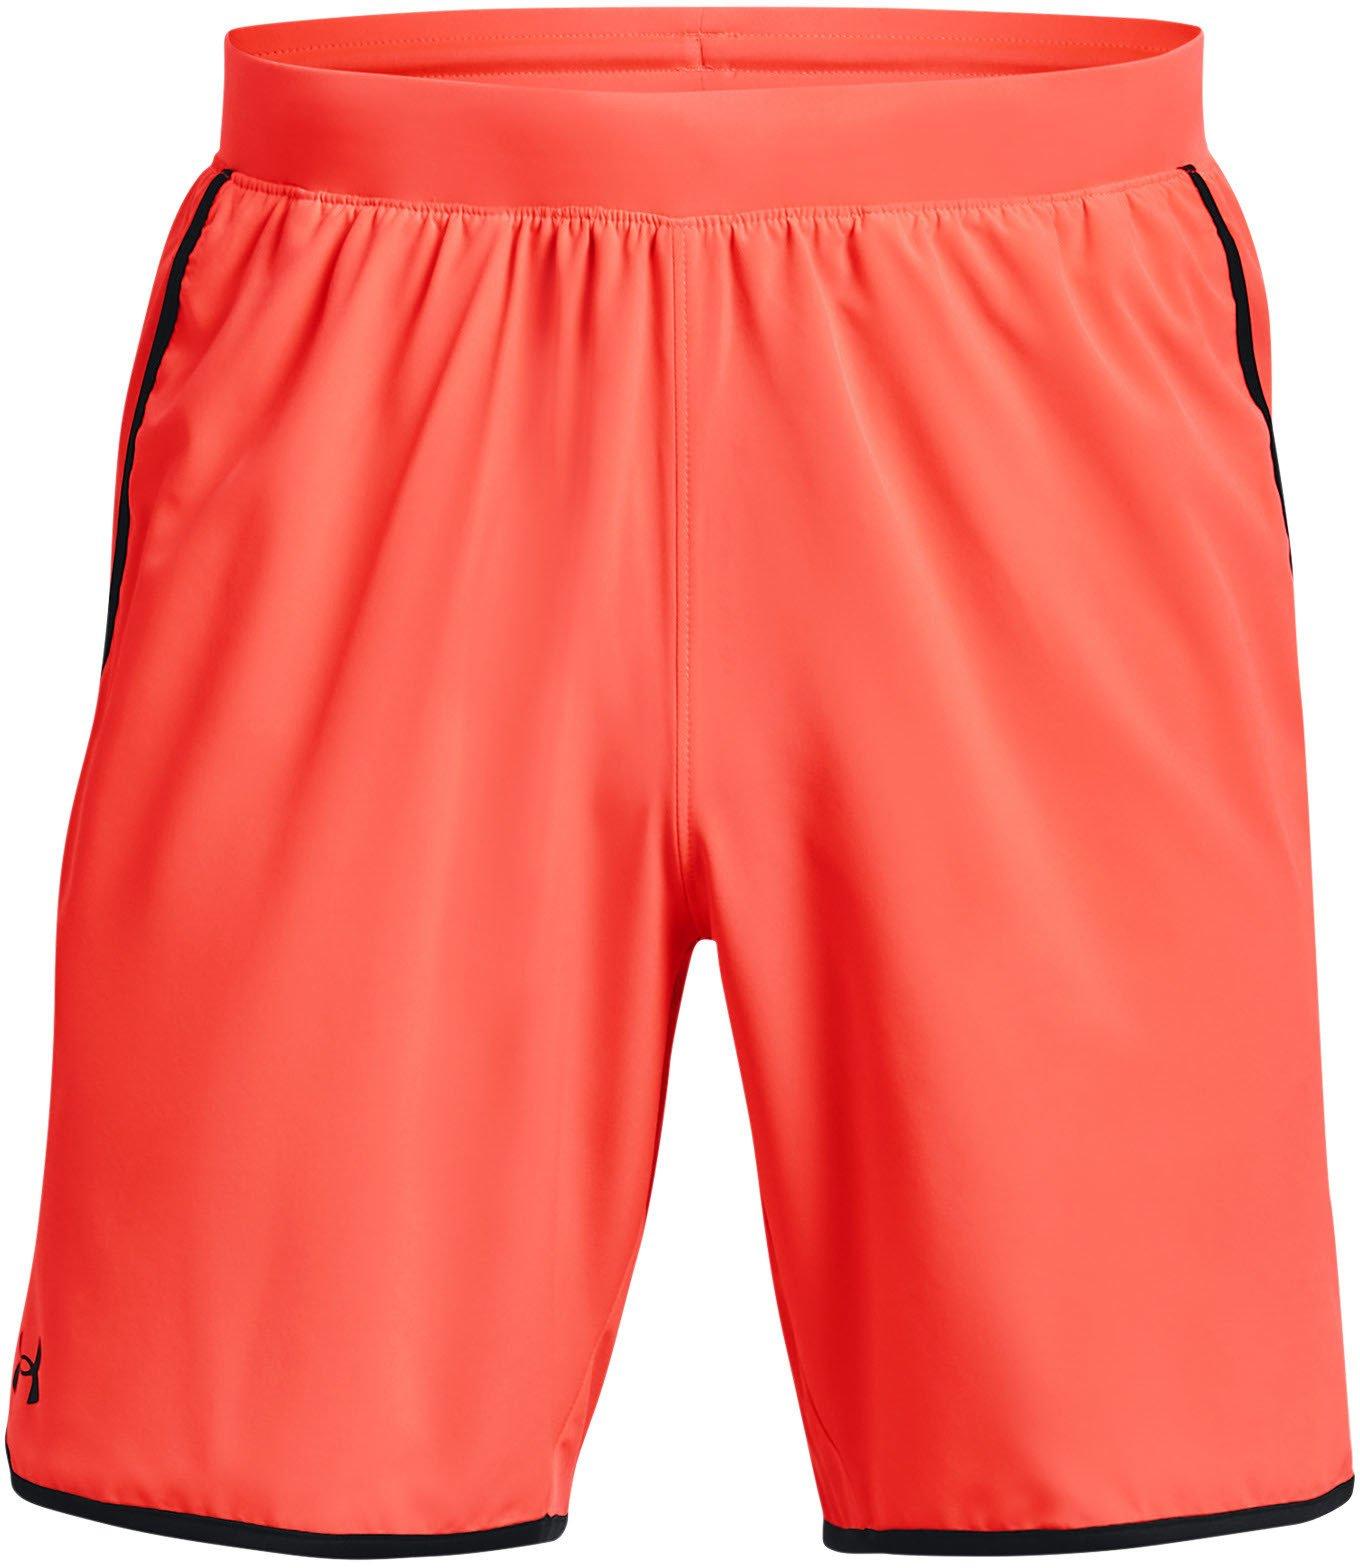 Under Armour HIIT Woven 8in Shorts-ORG XL